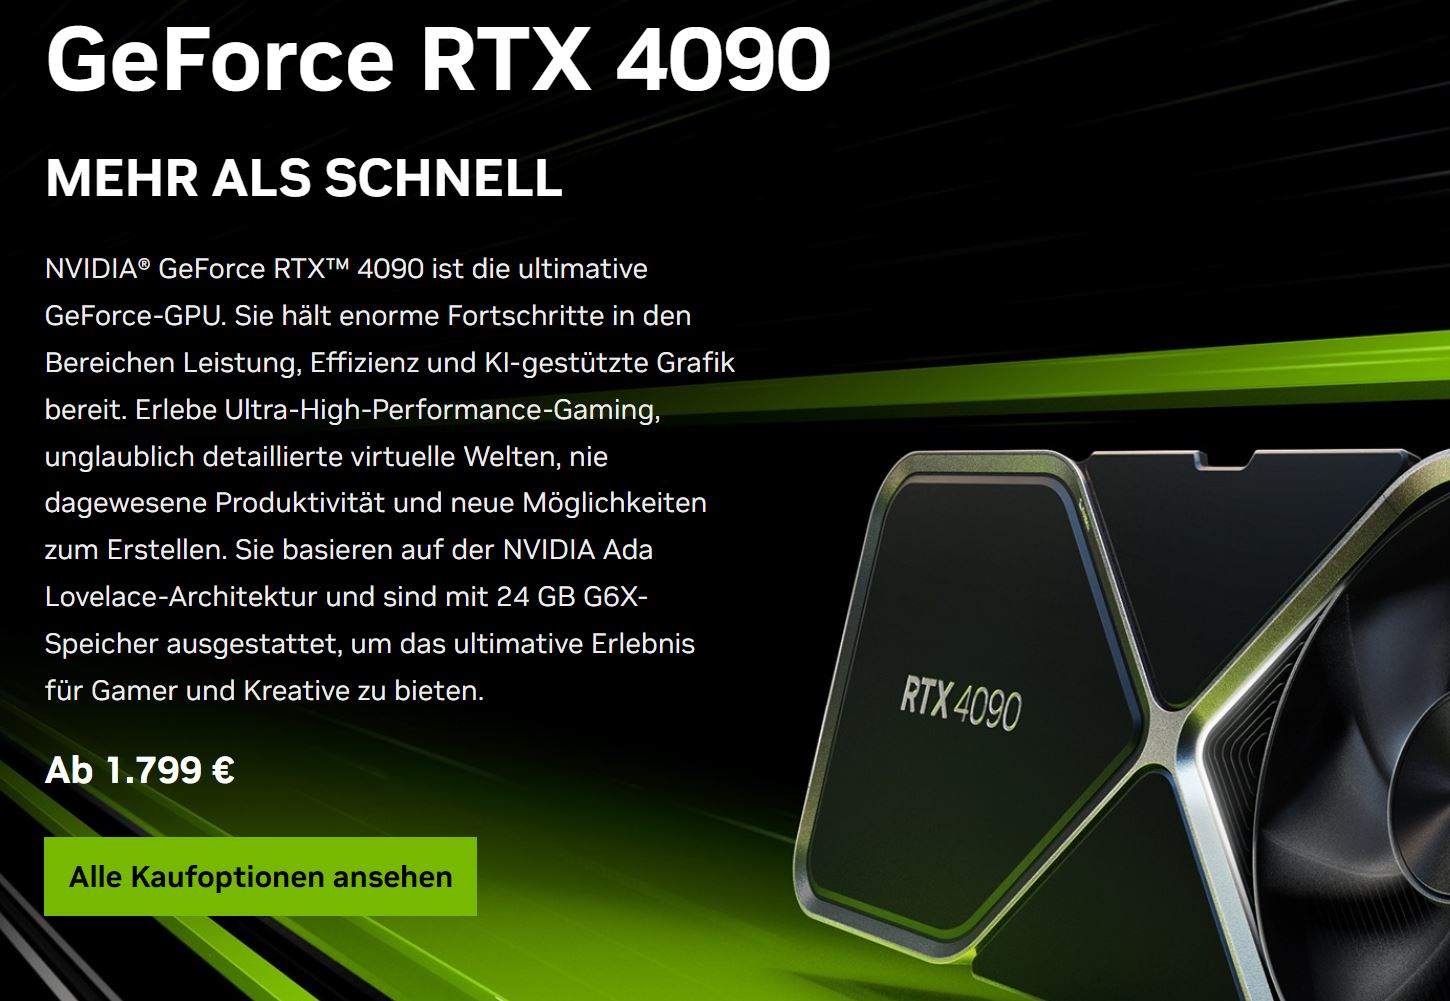 Nvidia RTX 4090 GPU Prices Skyrocketed in the Past 2 Weeks